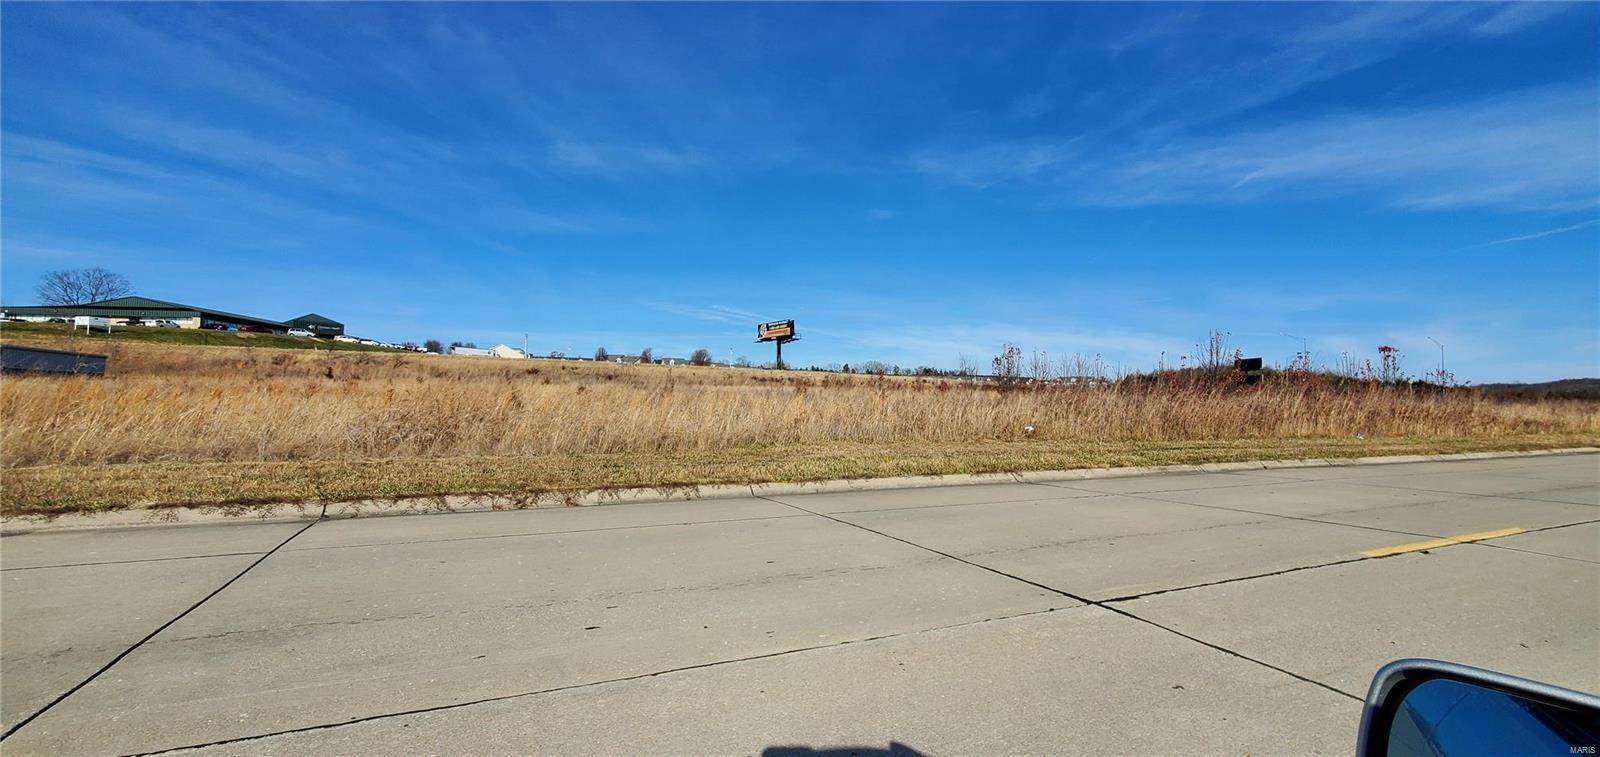 Property for Sale at 141 S Outer 50 Union, Missouri 63084 United States